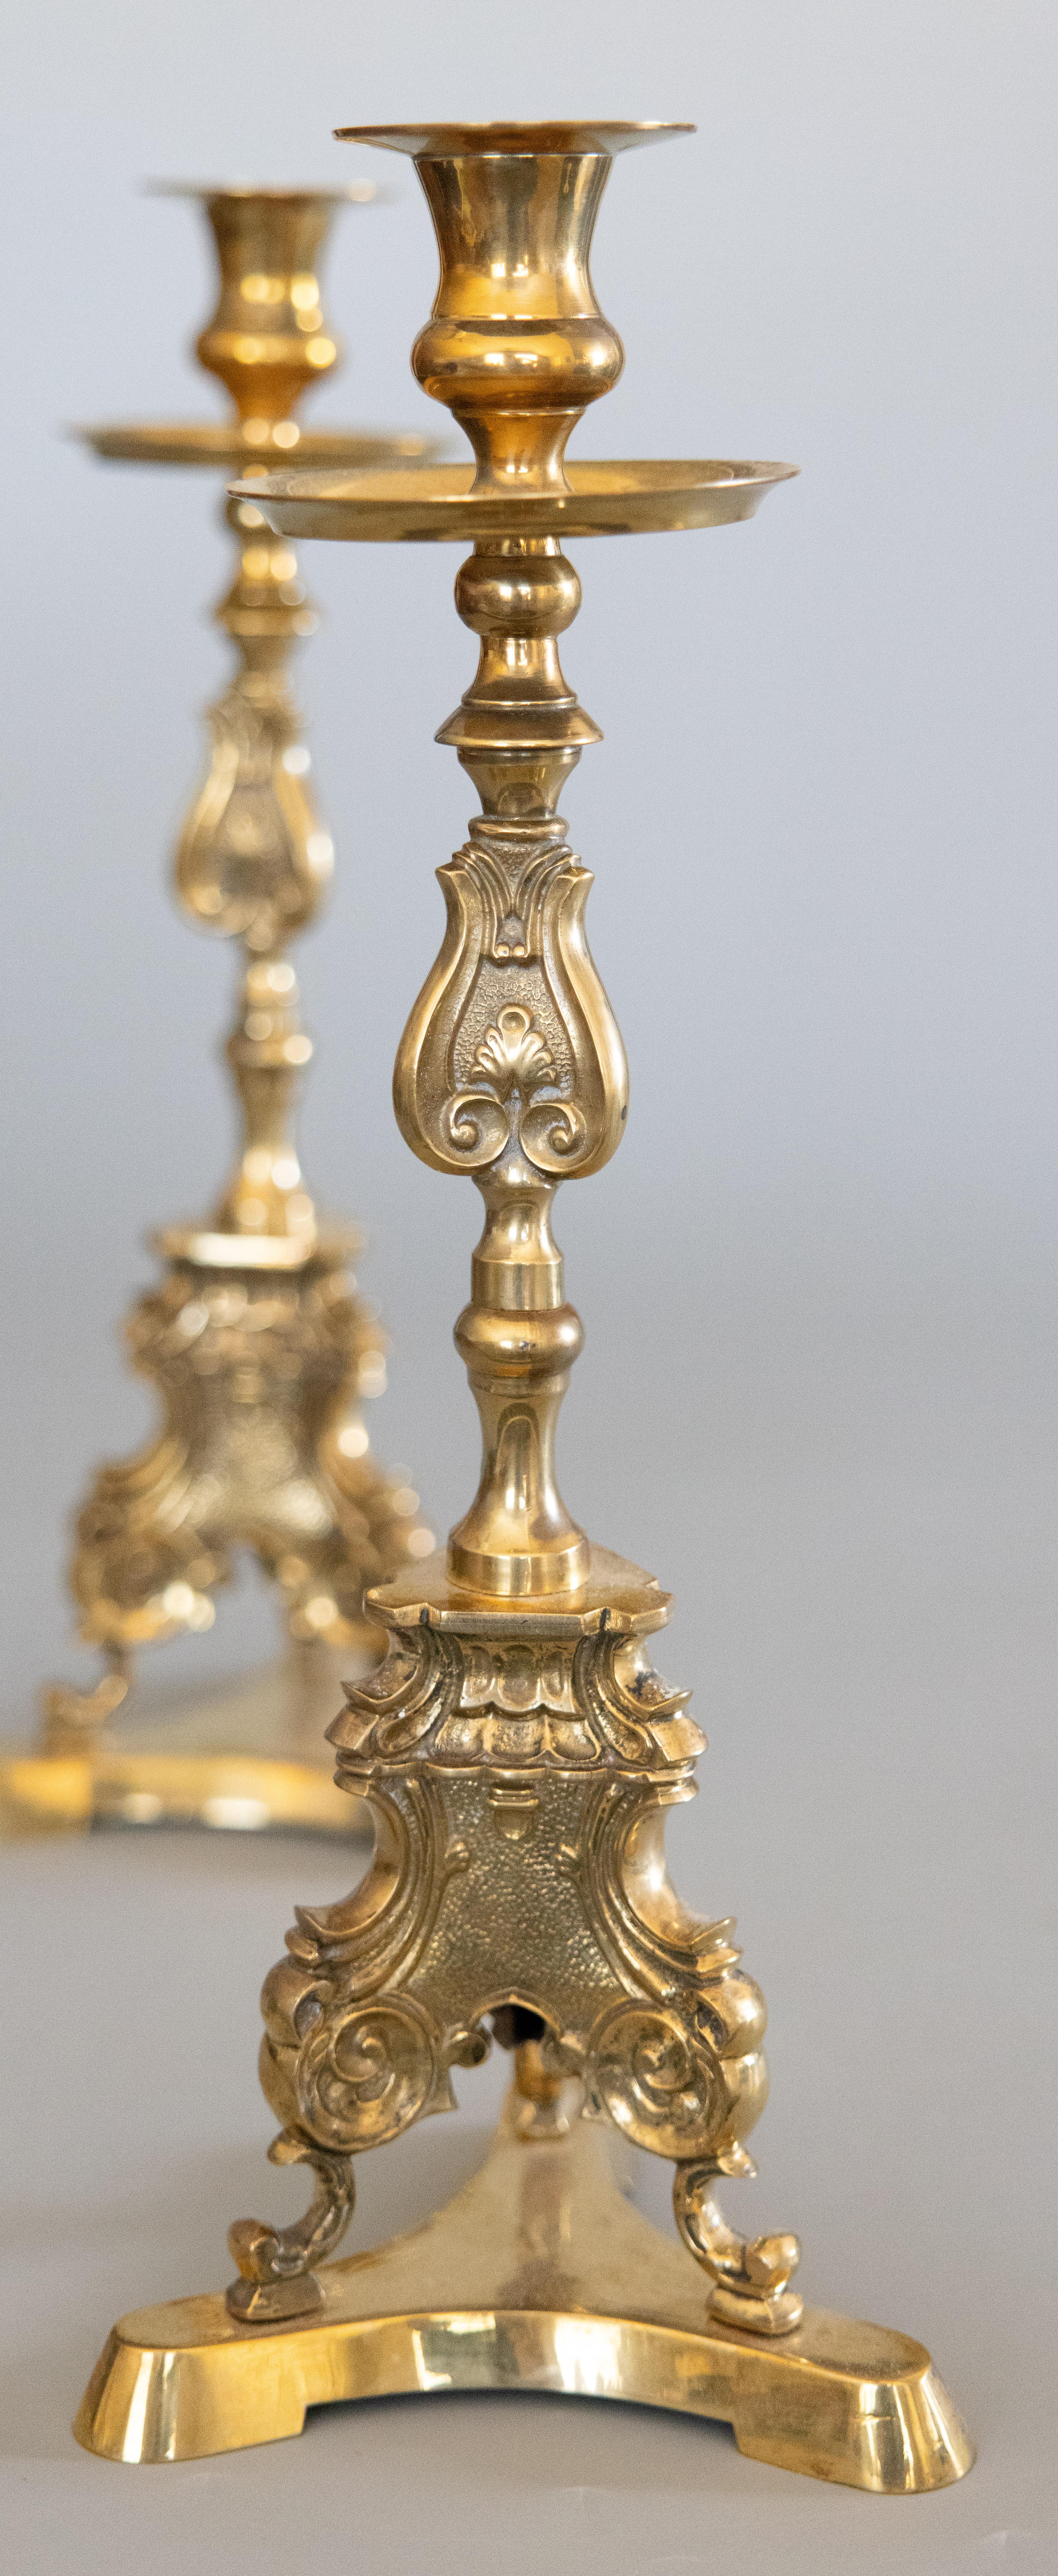 Pair of Antique French Brass Altar Candlesticks, circa 1920 In Good Condition For Sale In Pearland, TX